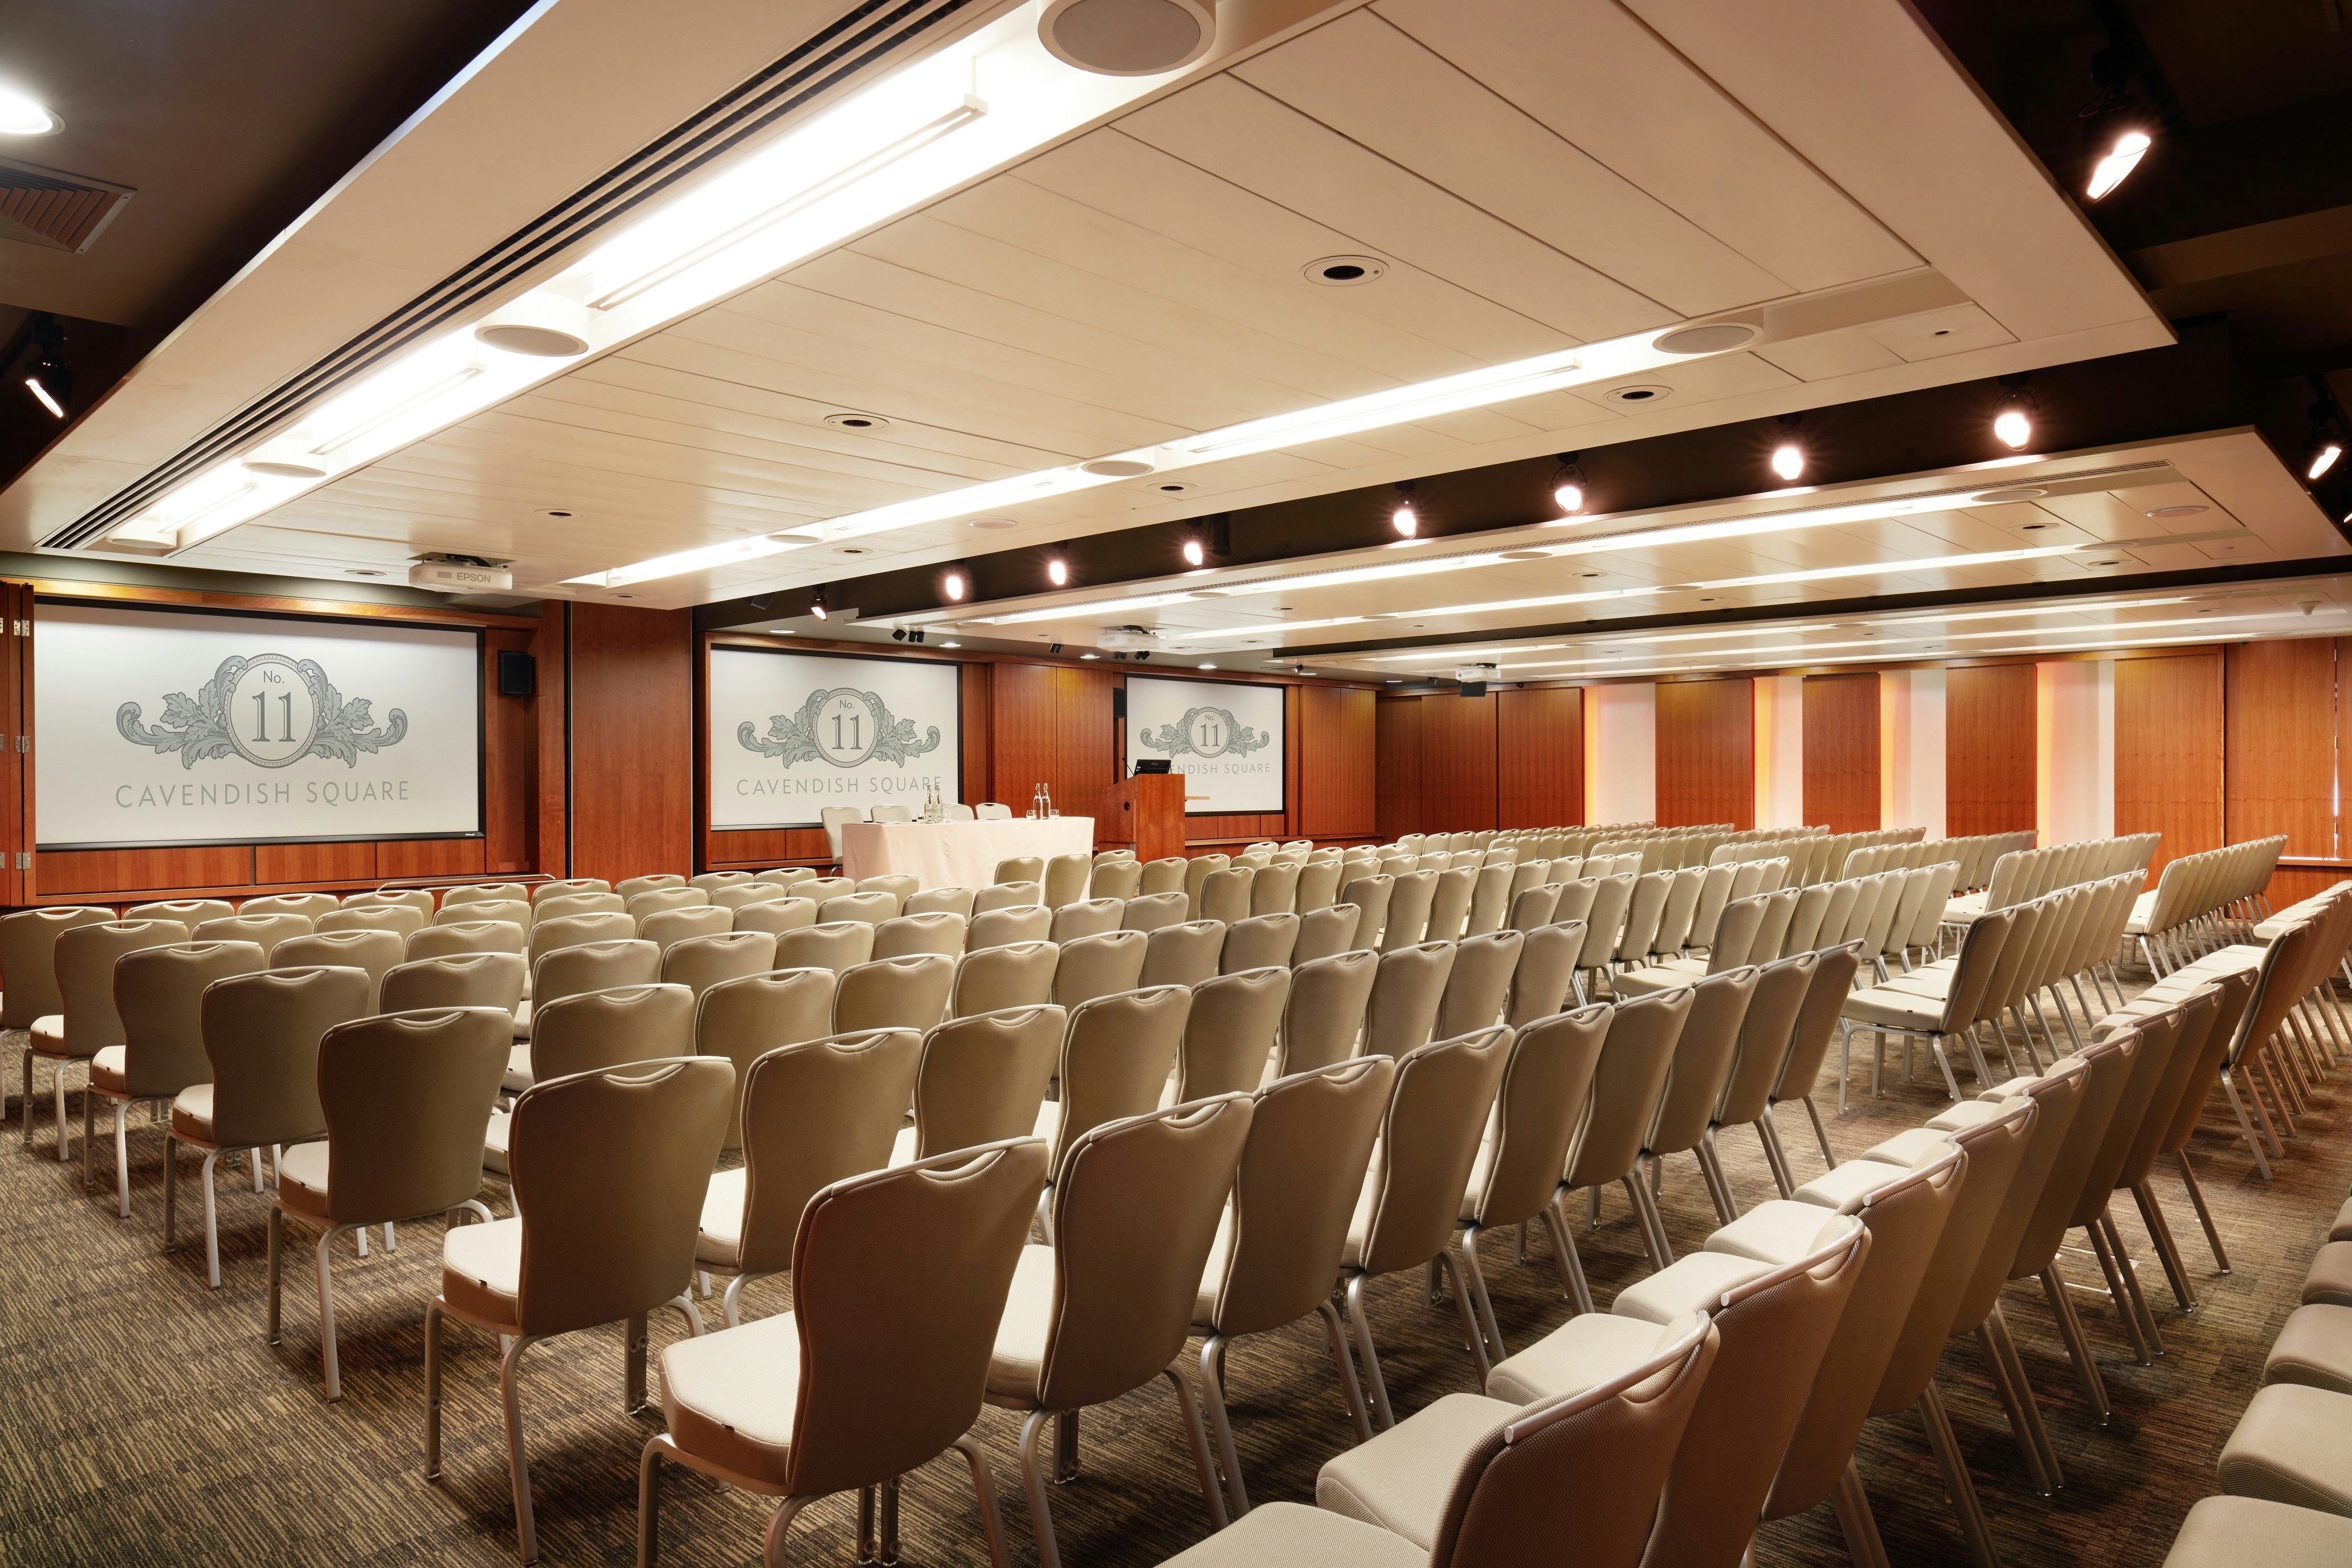 Conference Venues in West London - No.11 Cavendish Square